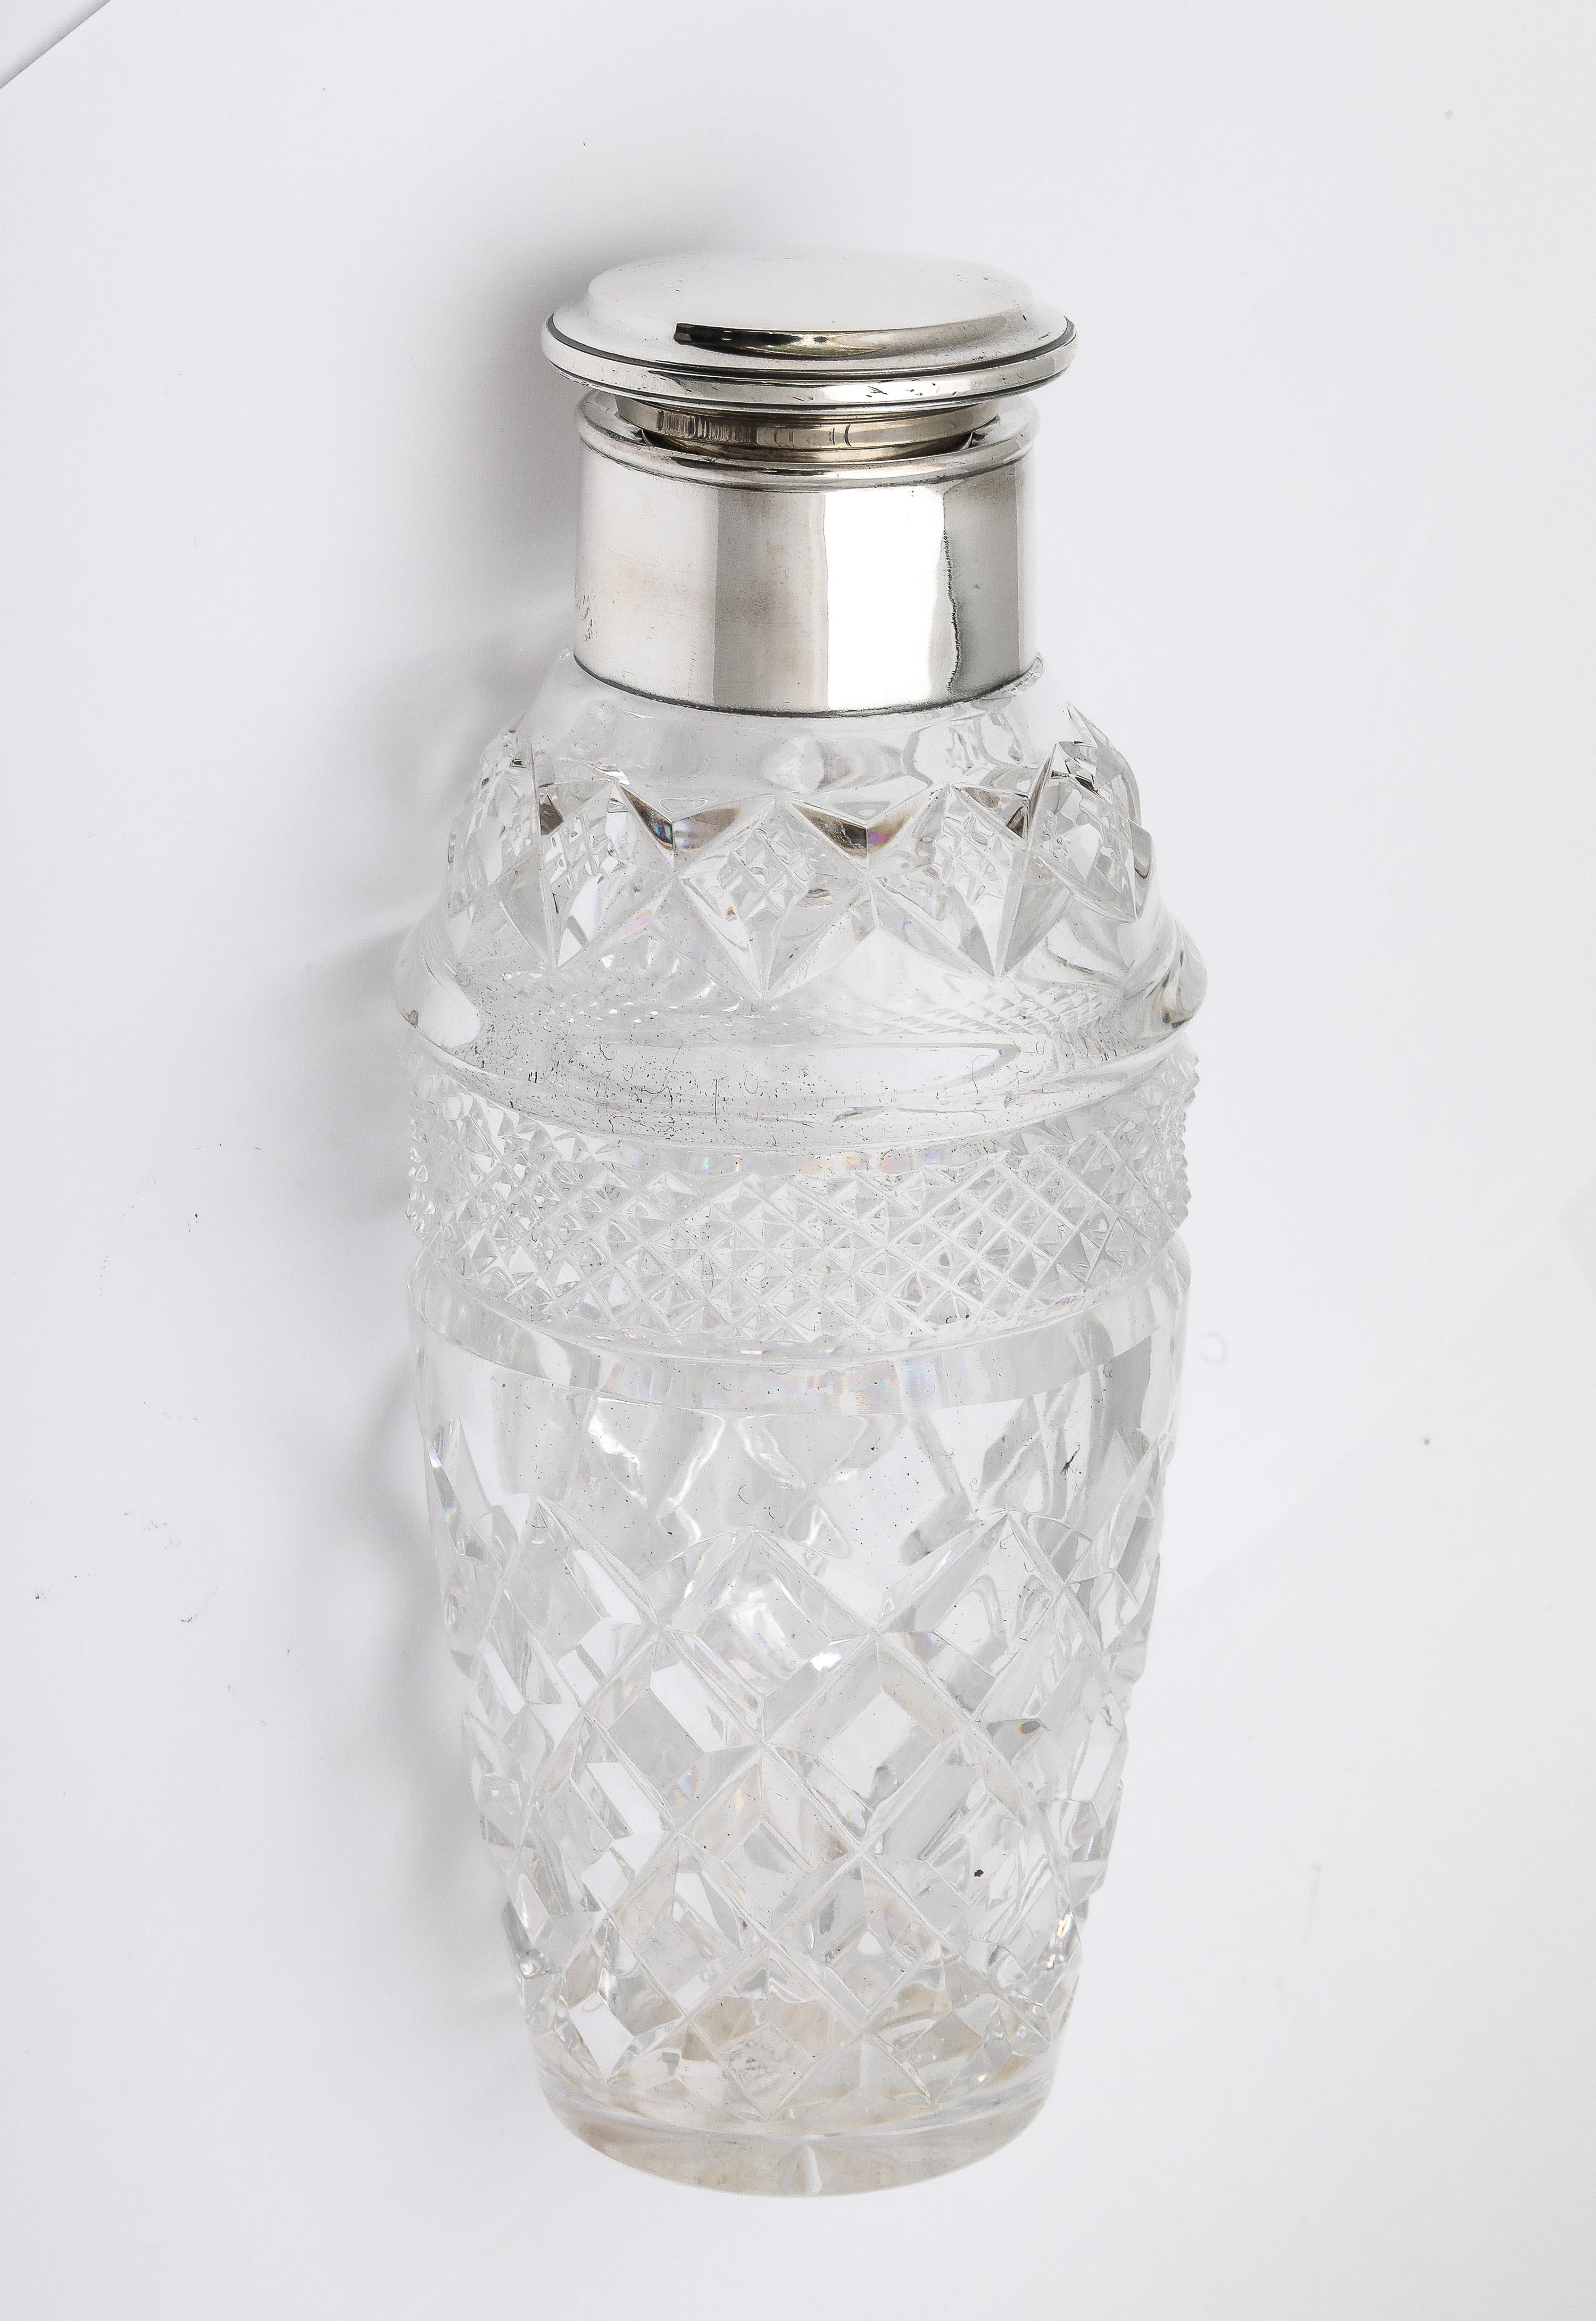 Unususual, Art Deco Period, sterling silver-mounted cocktail shaker, Birmingham, England, year-hallmarked for 1927, WP - maker. The maker's mark was registered in 1930-31, and, as in many cases, silversmiths were allowed to use their own mark even